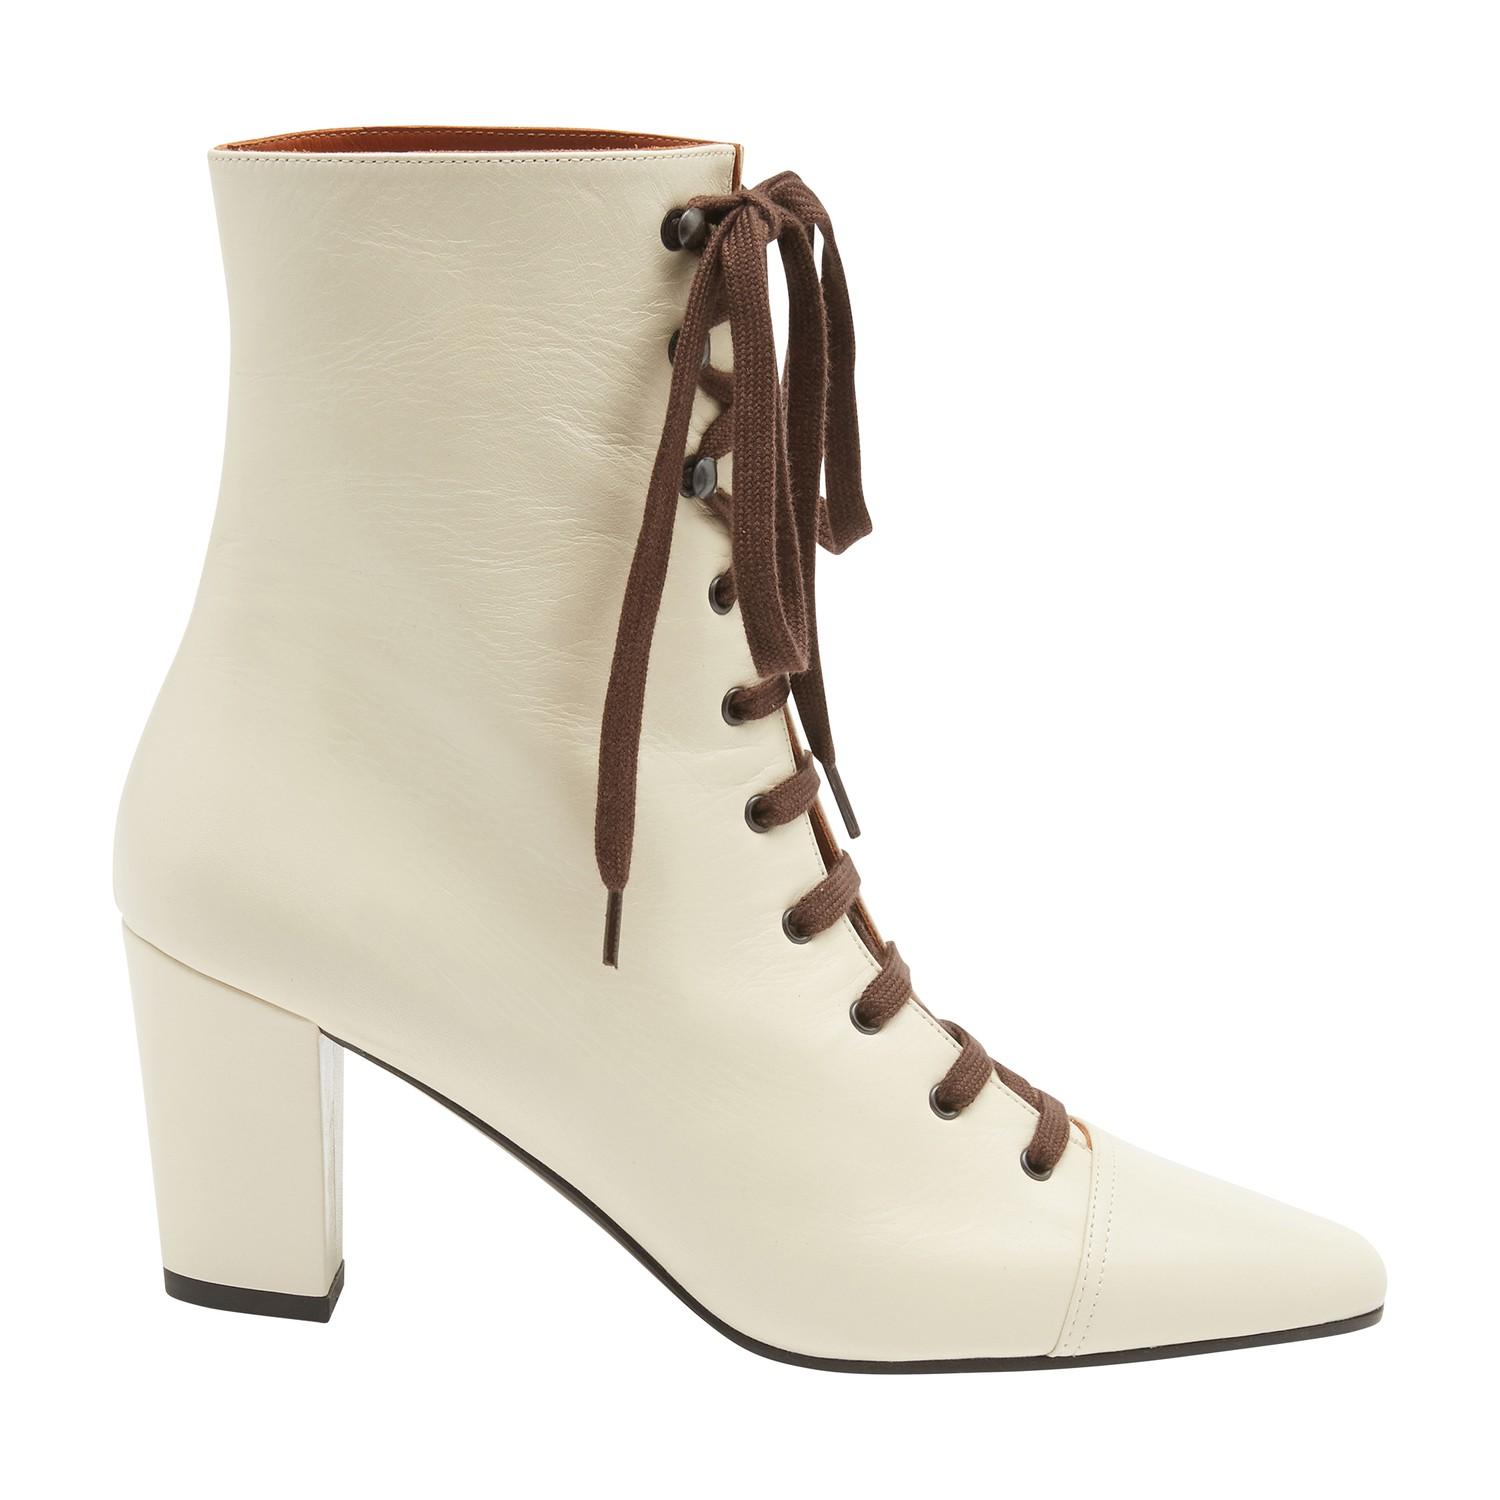 Michel Vivien Addison Ankle Boots in Natural - Save 30% - Lyst